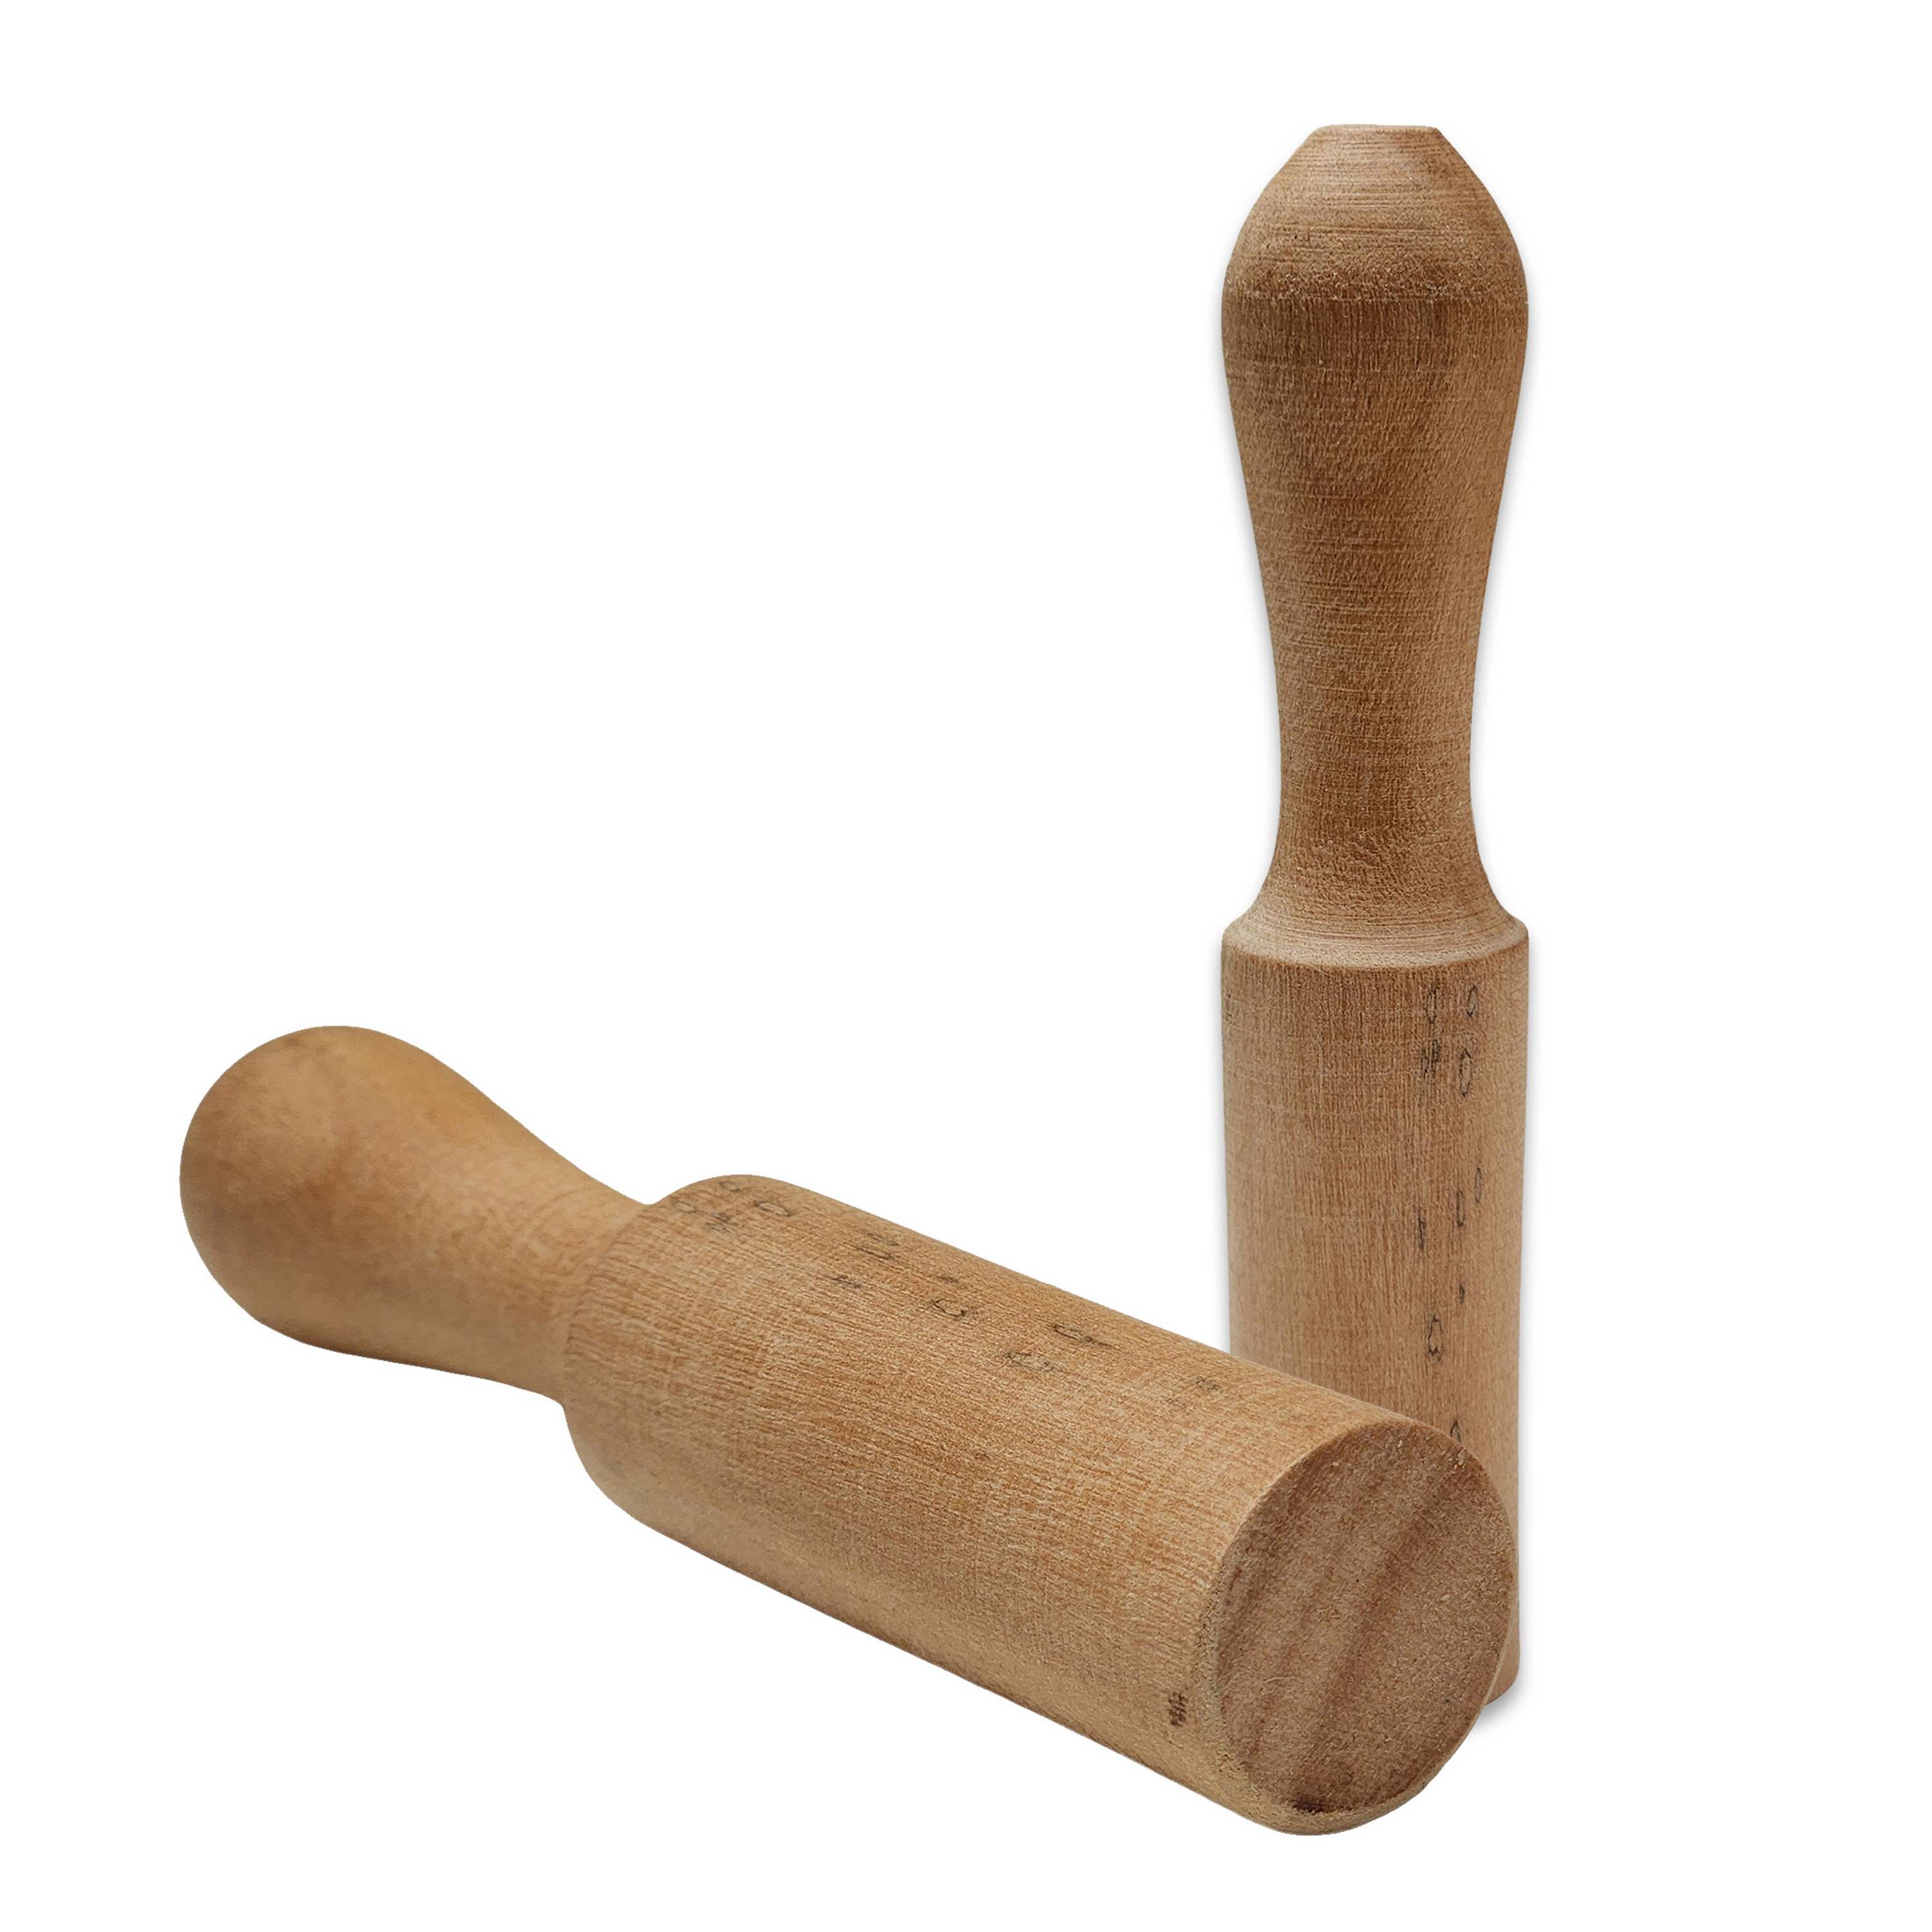 Singing Bowl Accessories, Wooden Stroking And Playing Mallet